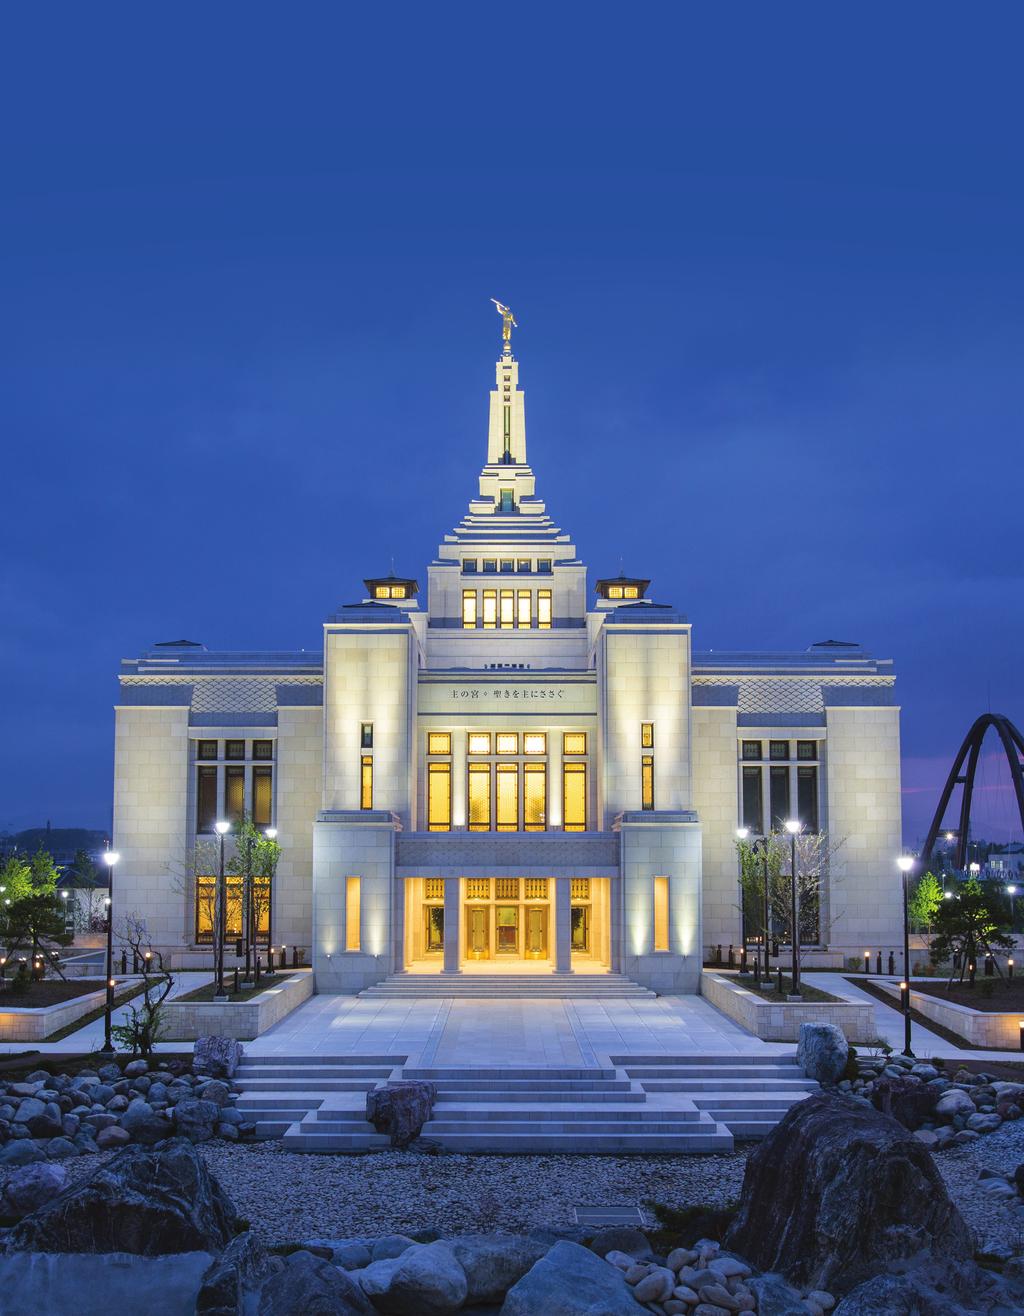 The Center will examine how Mormonism makes an impact around the globe, as well as how